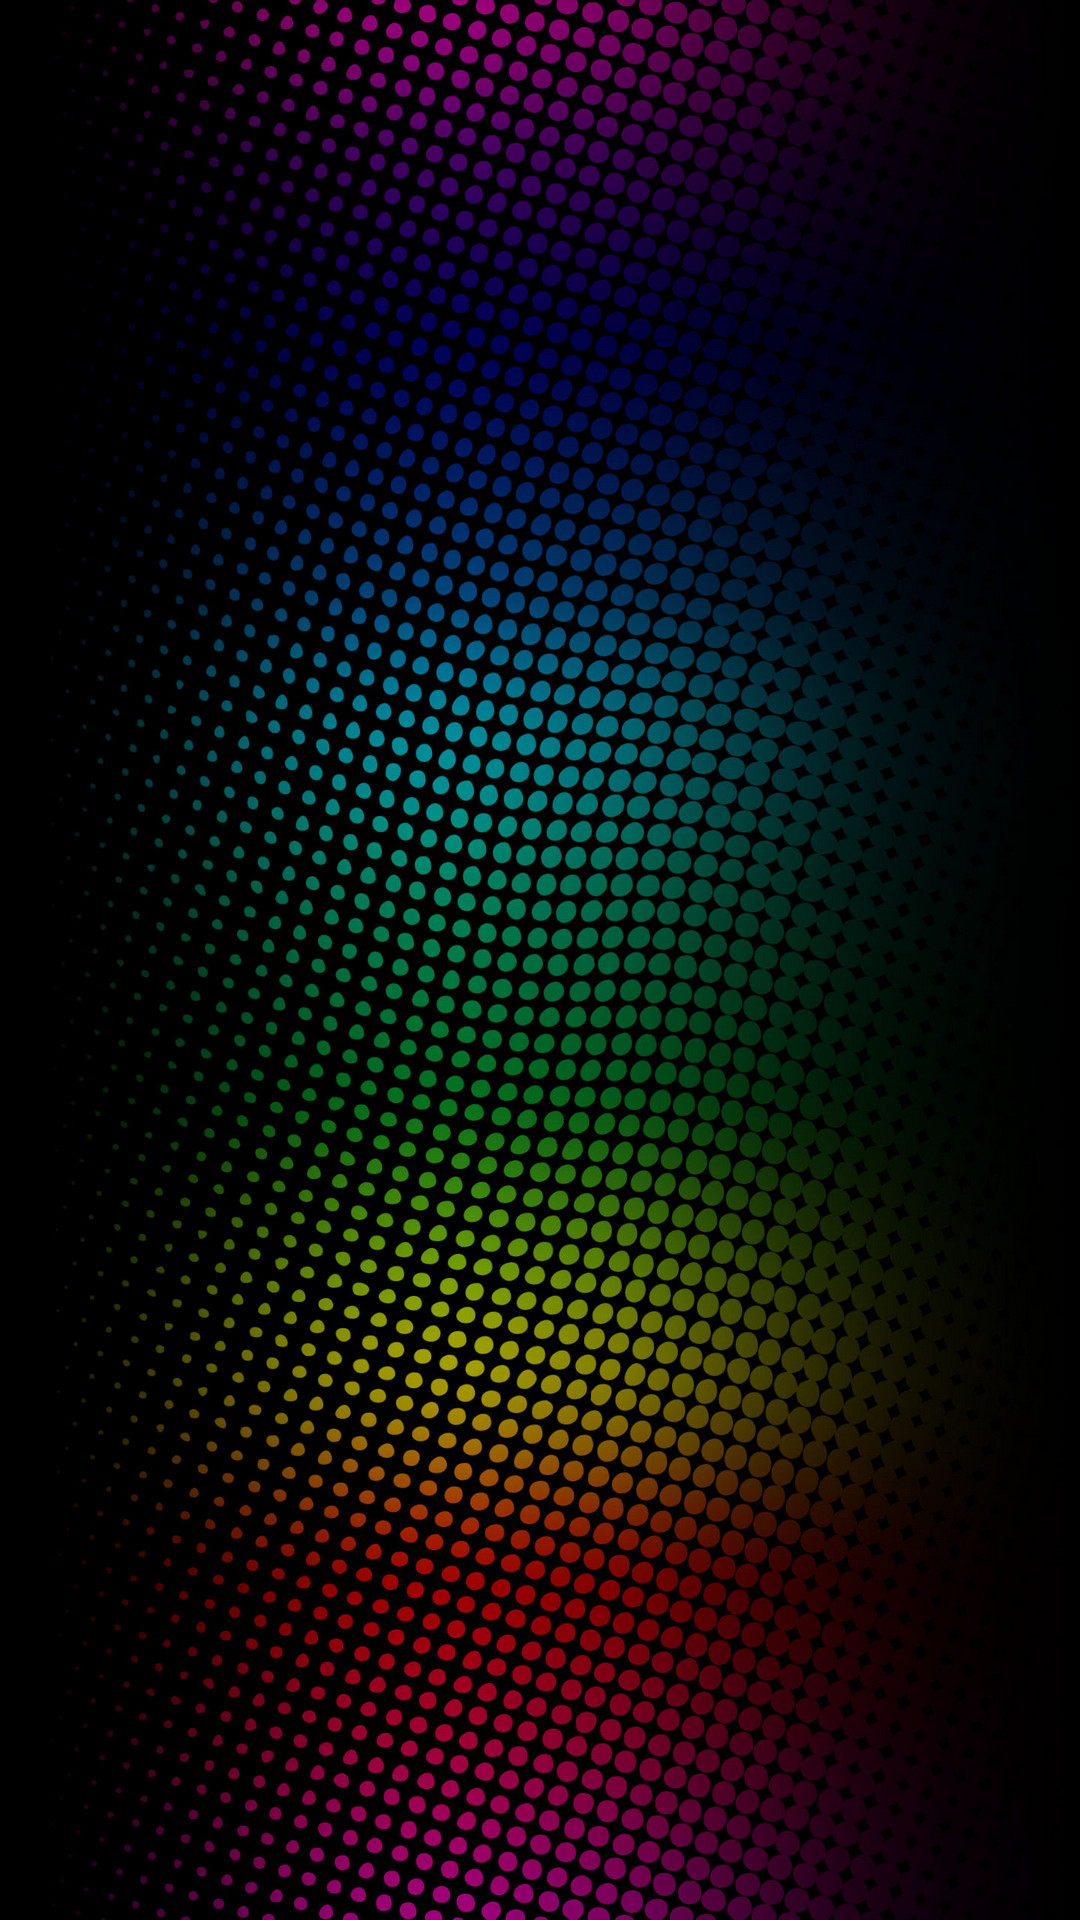 1080x1920 nexus 5 Color wallpaper HD, the world's largest collection of wallpapers!